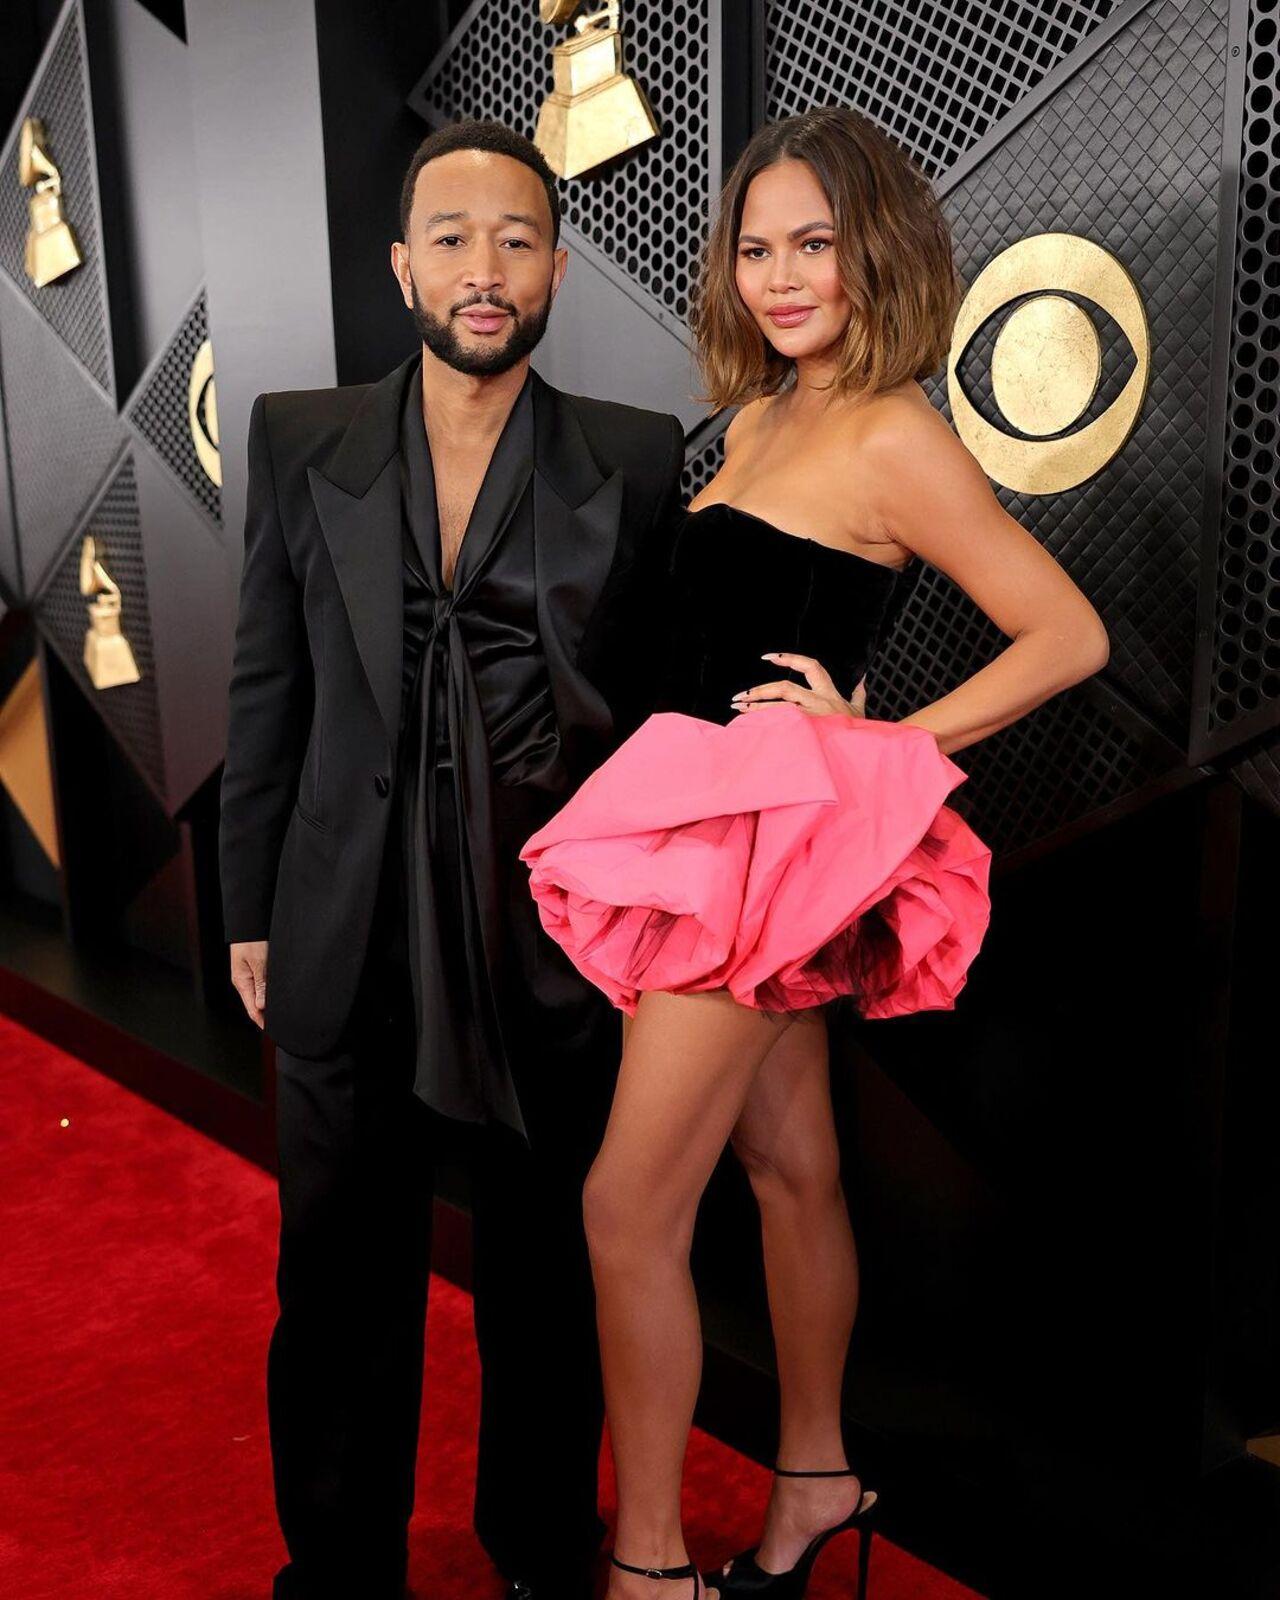 John Legend and Chrissy Teigen turned up in custom Sophie couture